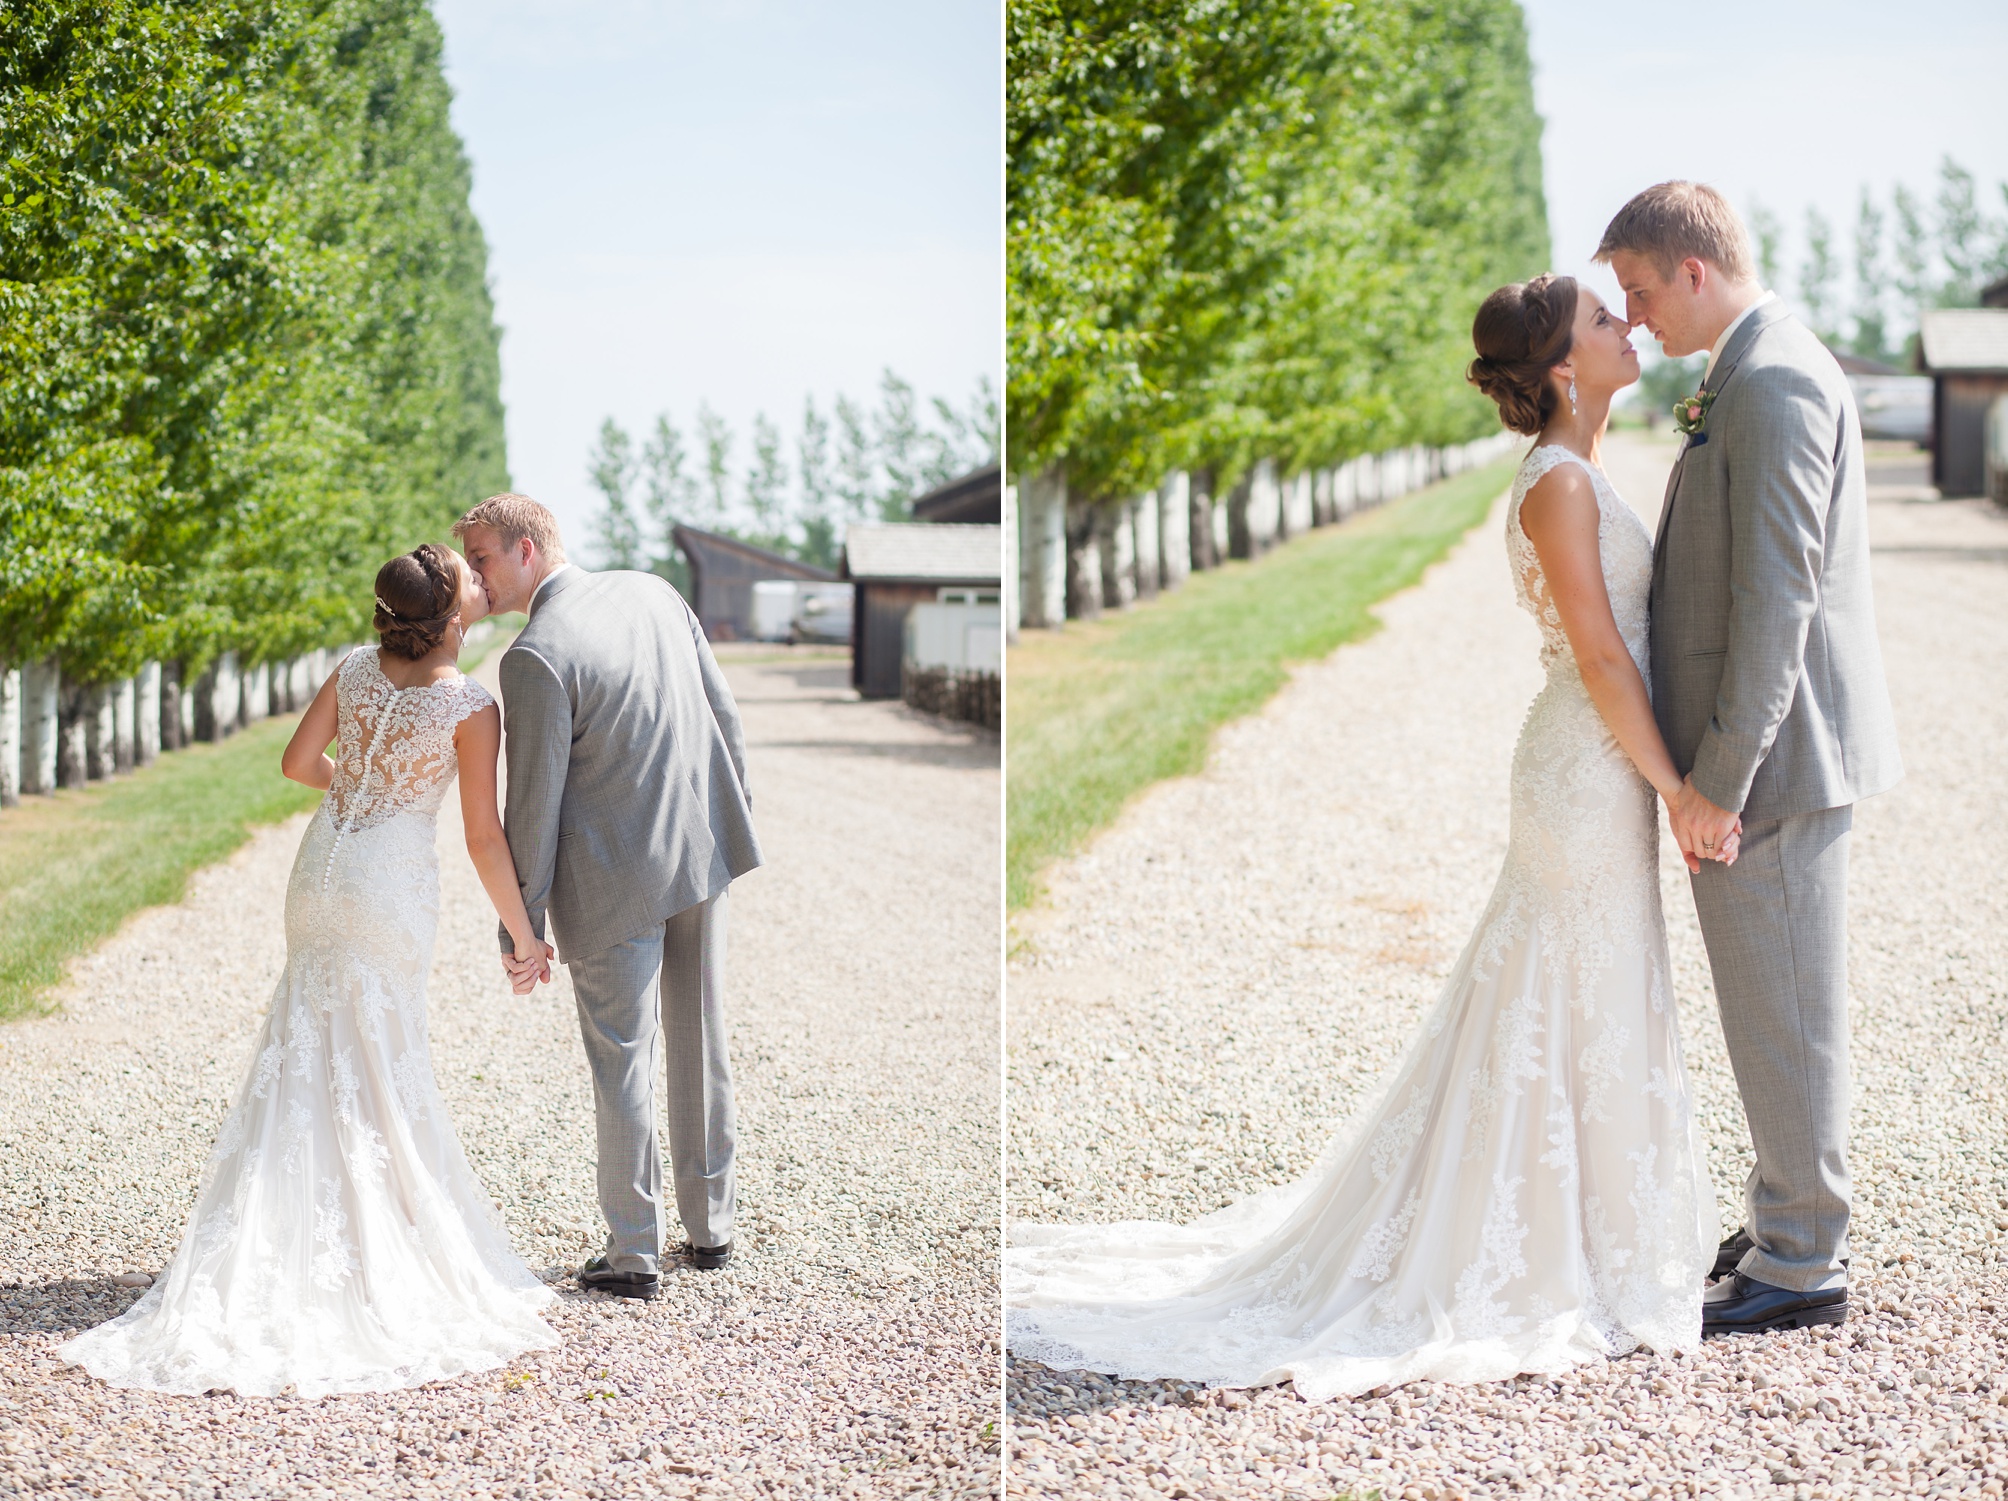 Ben and Lachelle's classy blush pink and navy blue outdoor summer wedding at Val Halla in Taber